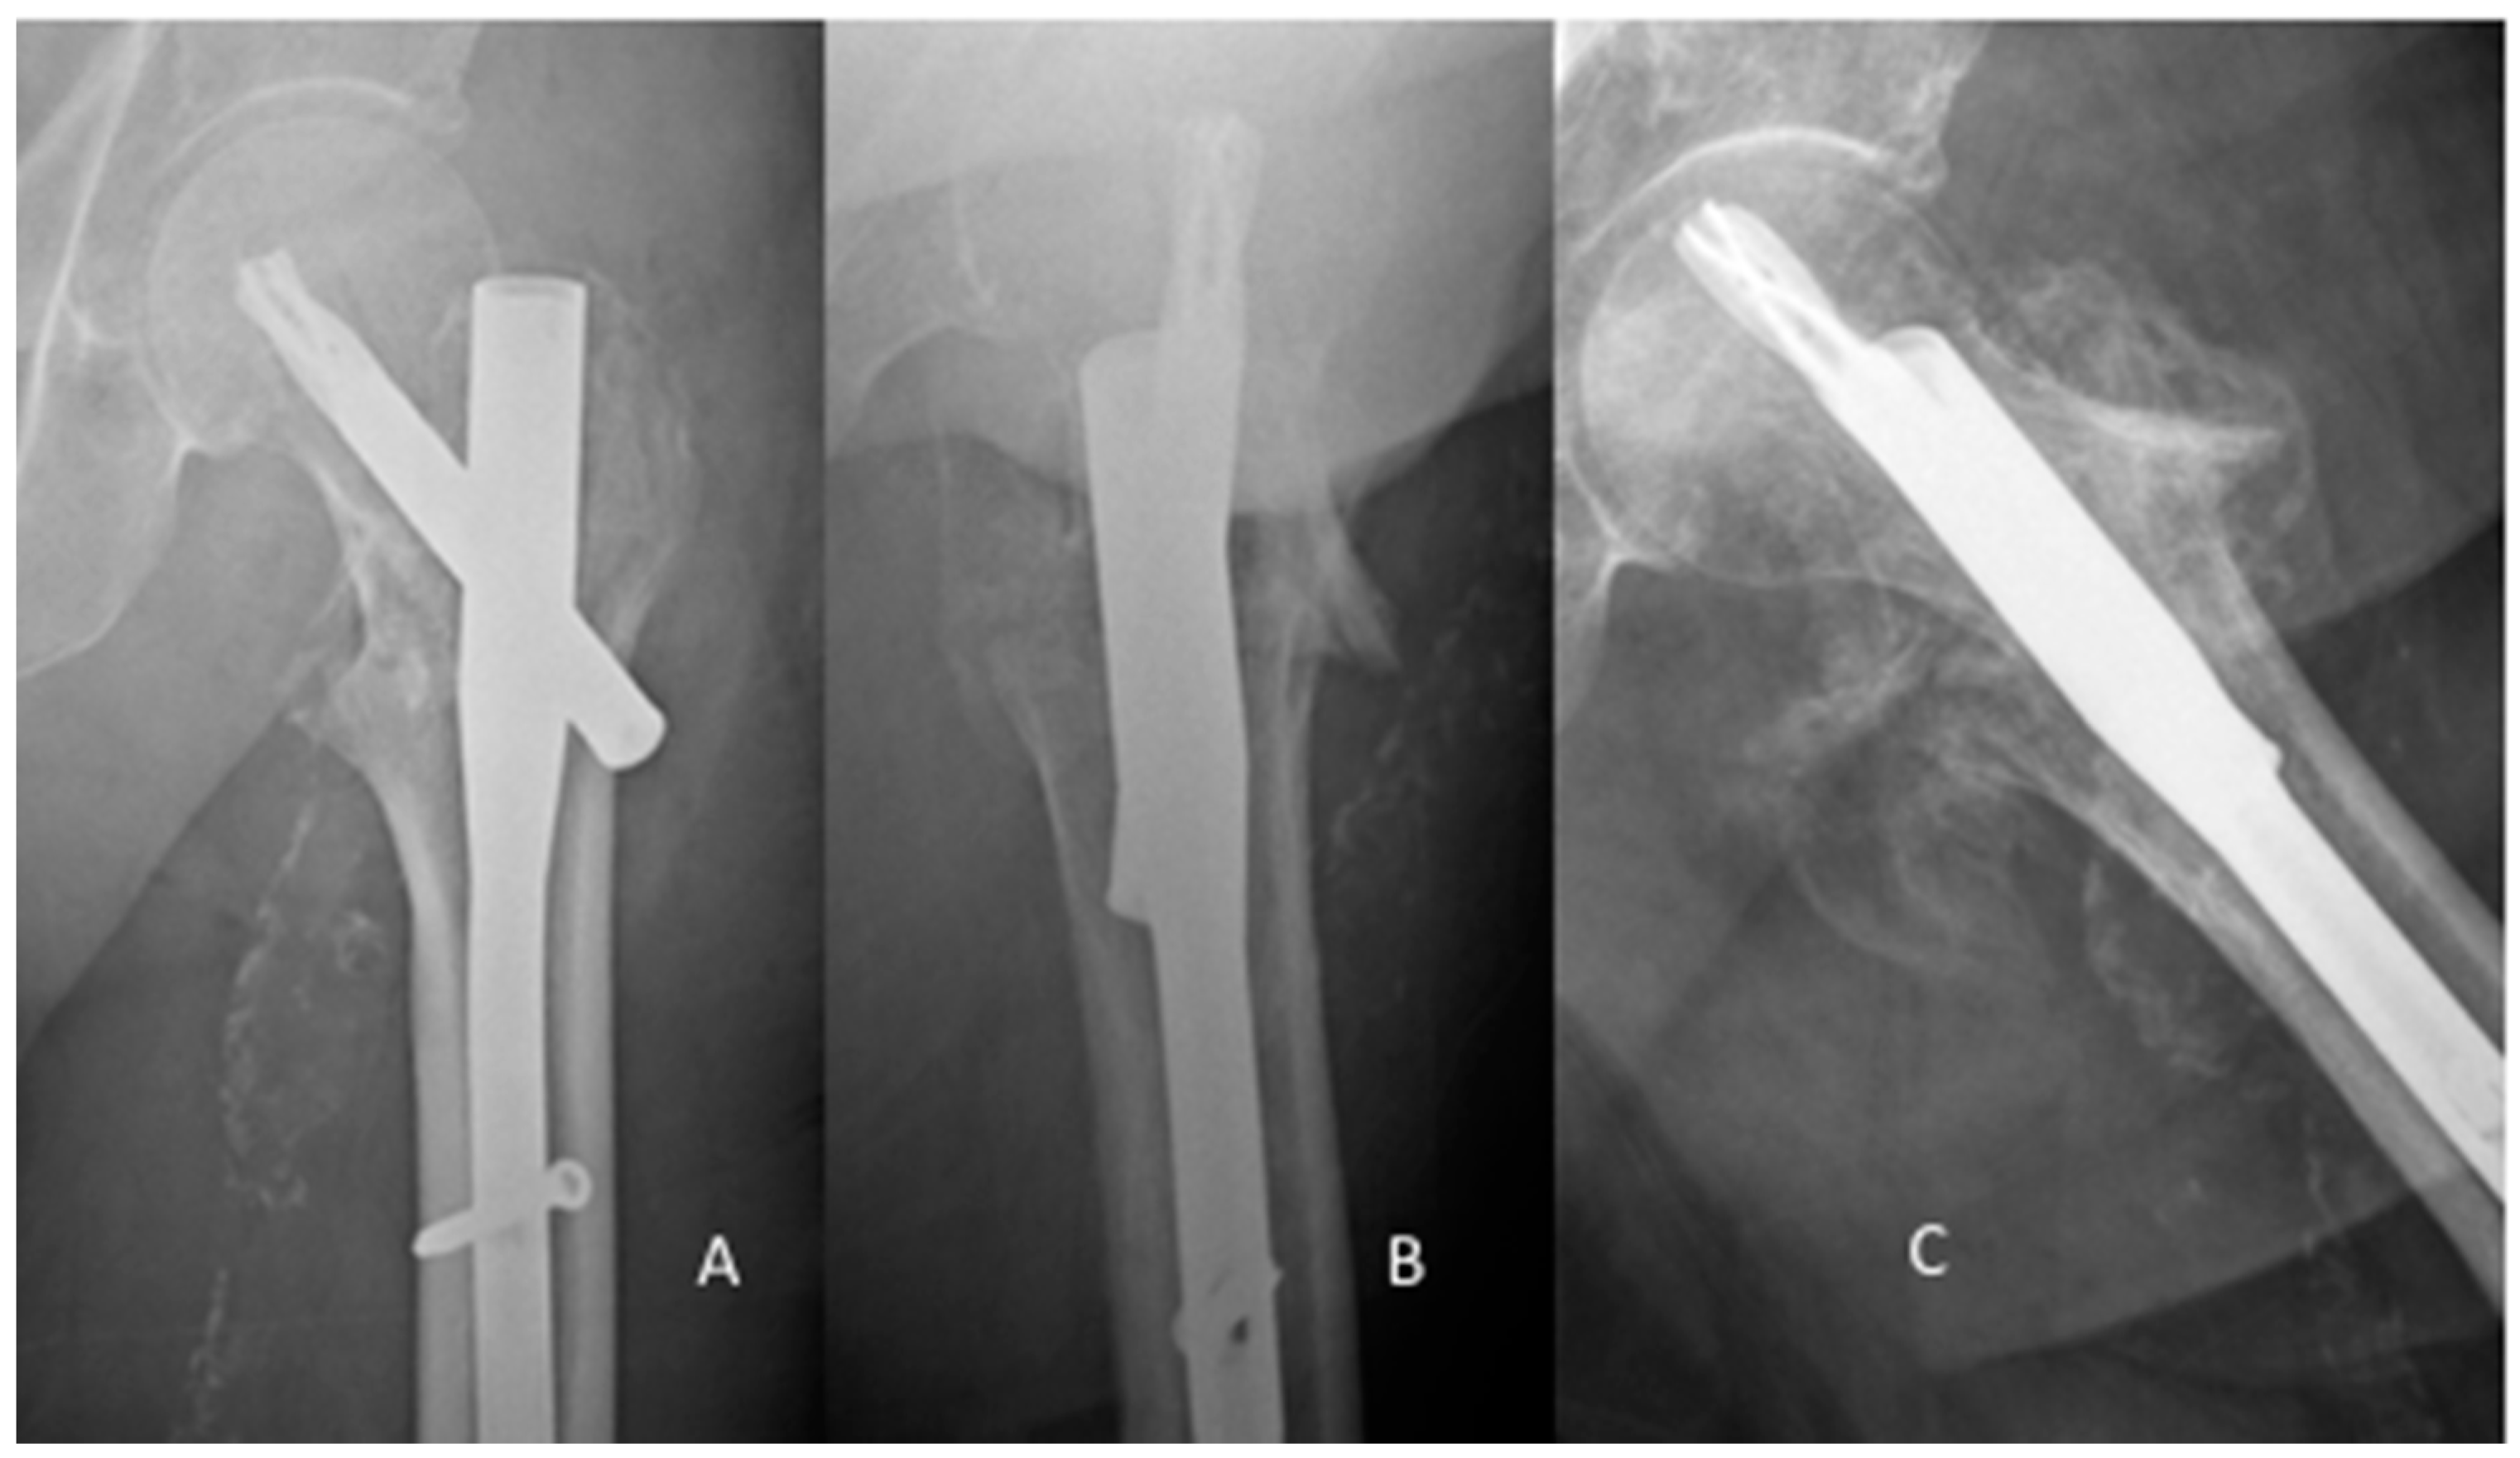 JCM | Free Full-Text | Migration of the Lag Screw after Intramedullary  Treatment of AO/OTA  Pertrochanteric Fractures Does Not Result in  Higher Incidence of Cut-Outs, Regardless of Which Implant Was Used: